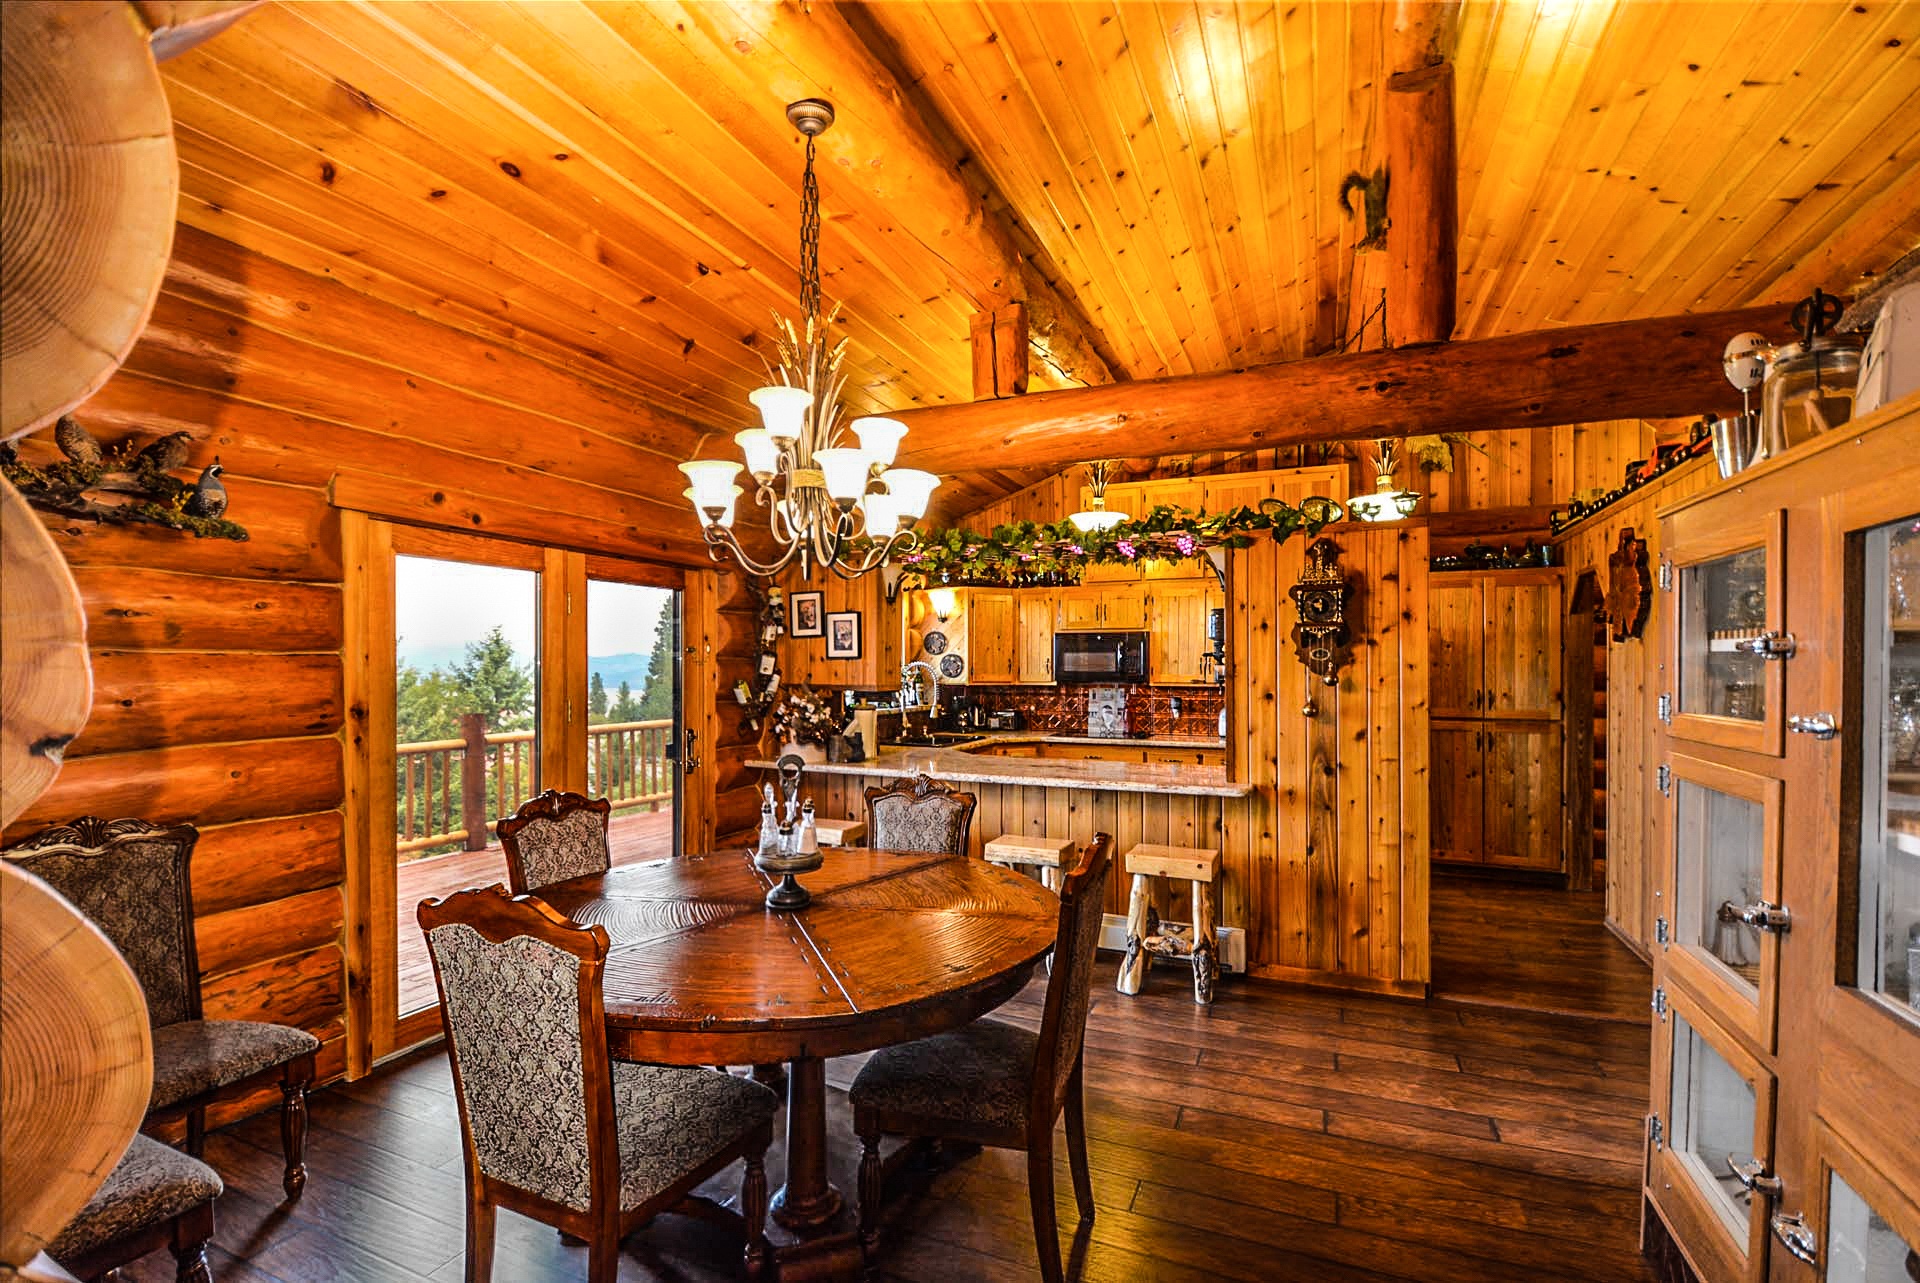 Very nice kitchen in a North Idaho log home